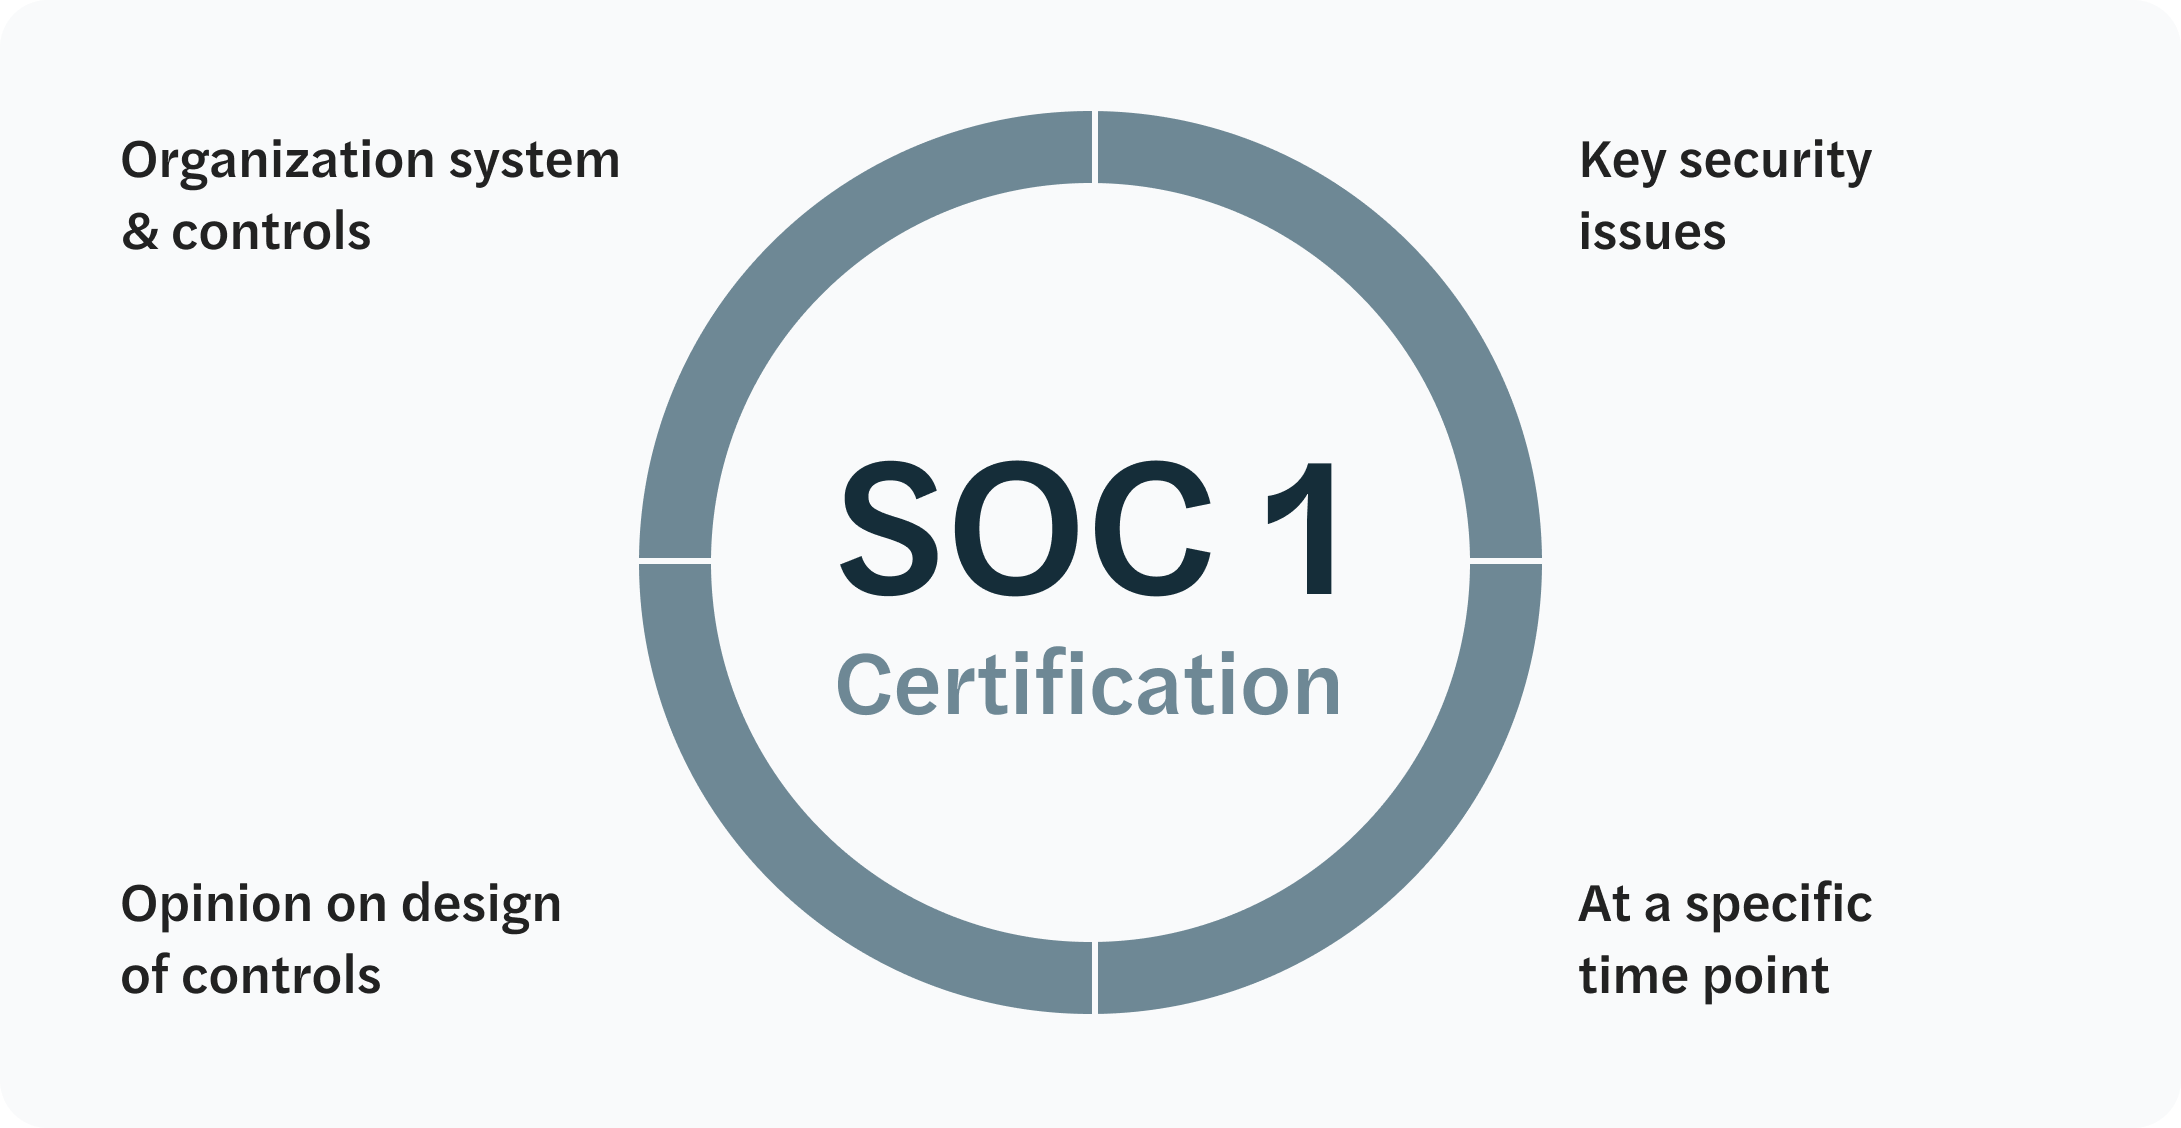 SOC 1 Ceritication Benefits - Organization system & controls, Key security issues, Opinion on design of controls, at a specific time point